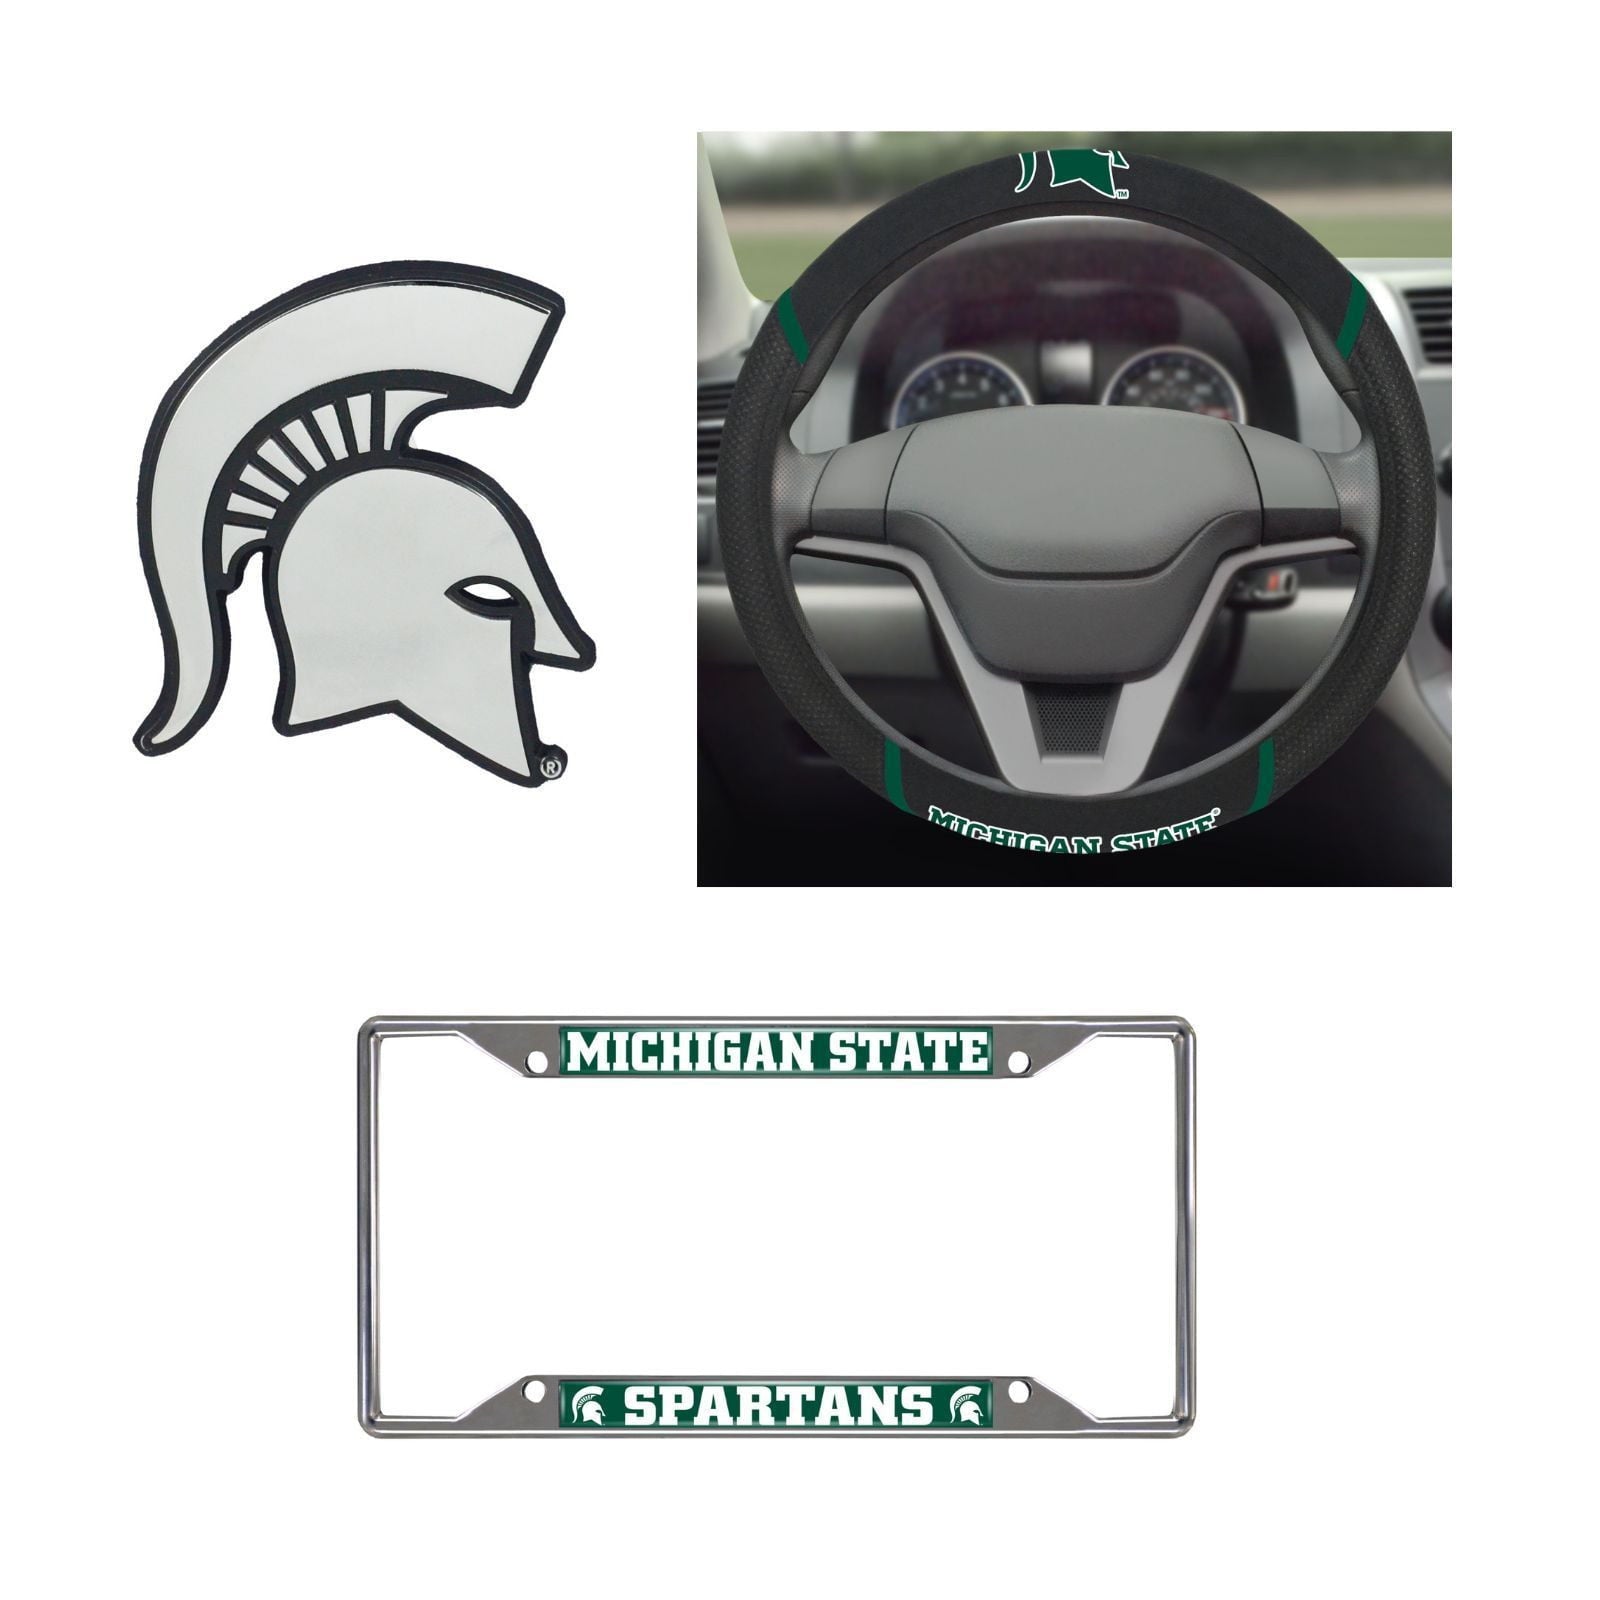 Michigan State Spartans Steering Wheel Cover, License Plate Frame, 3D Chrome Emblem